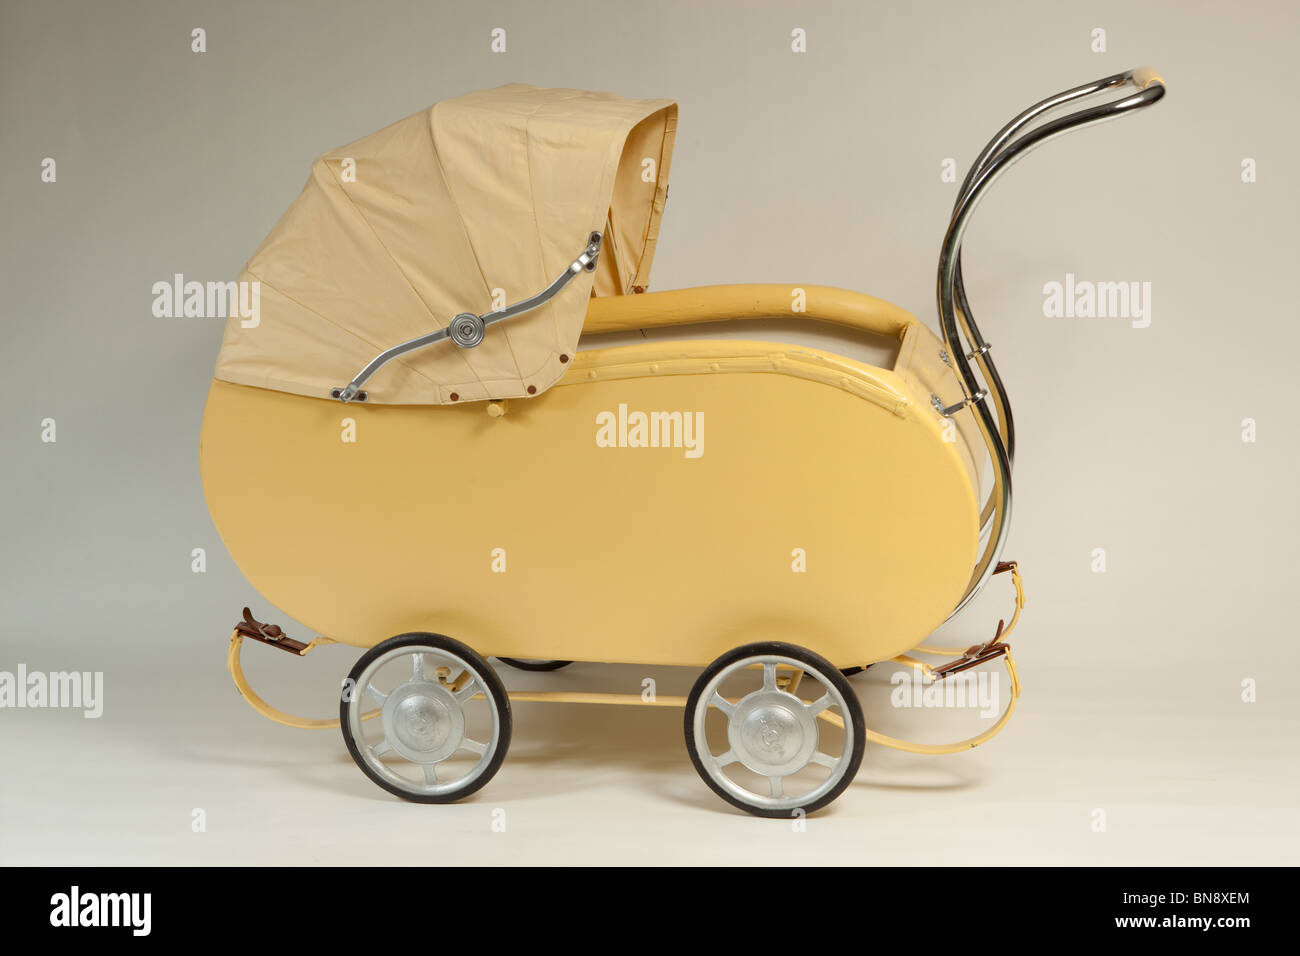 Vintage Perambulator High Resolution Stock Photography and Images - Alamy